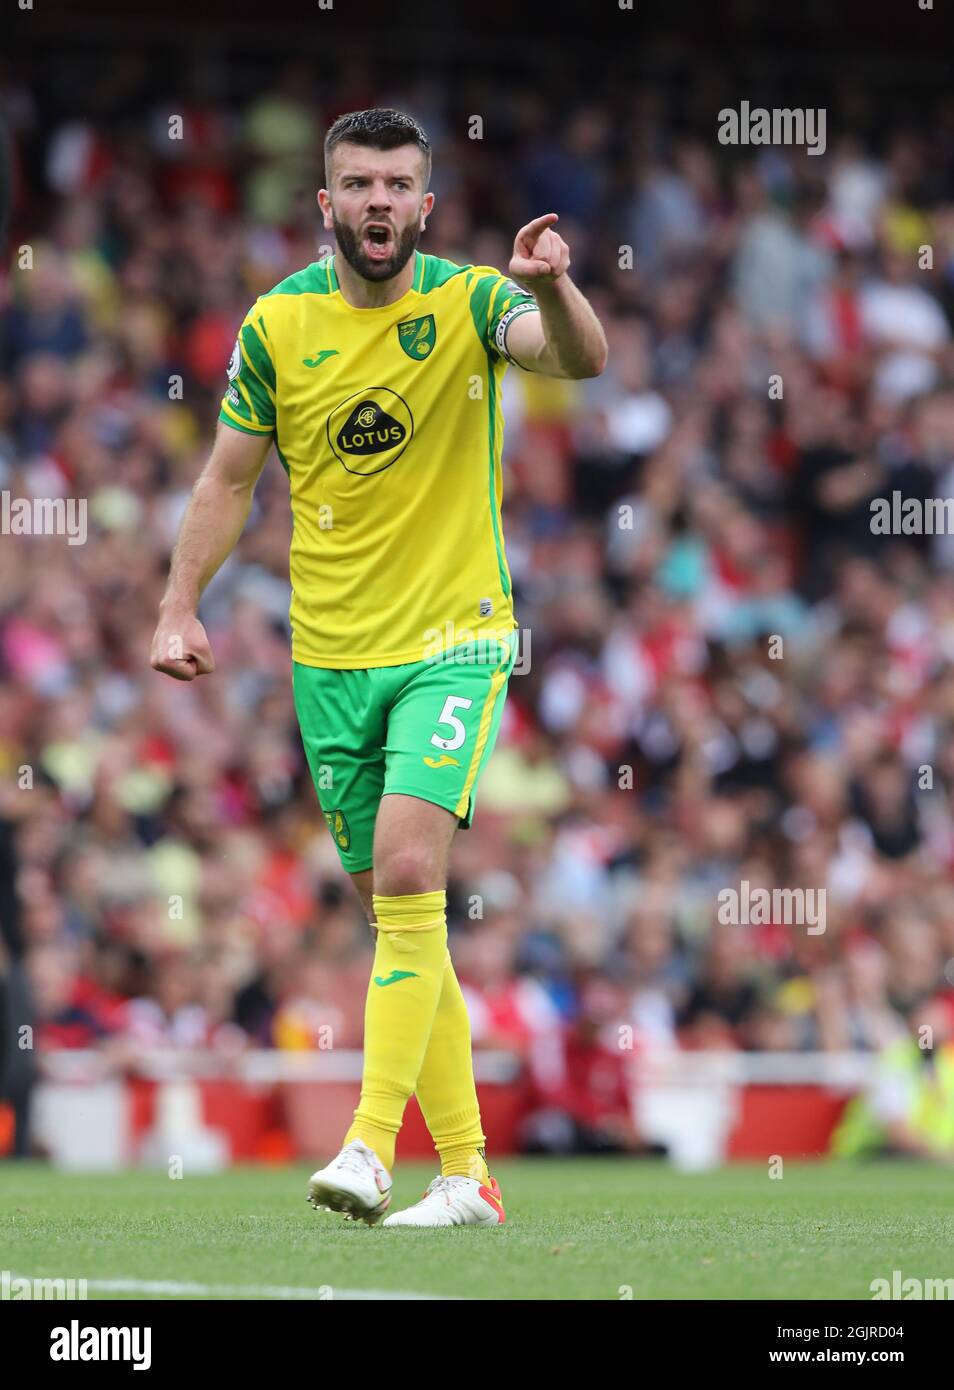 London, UK. 11th Sep, 2021. Grant Hanley (NC) at the EPL match Arsenal v Norwich City, at the Emirates Stadium, London, UK on 11th September, 2021. Credit: Paul Marriott/Alamy Live News Stock Photo